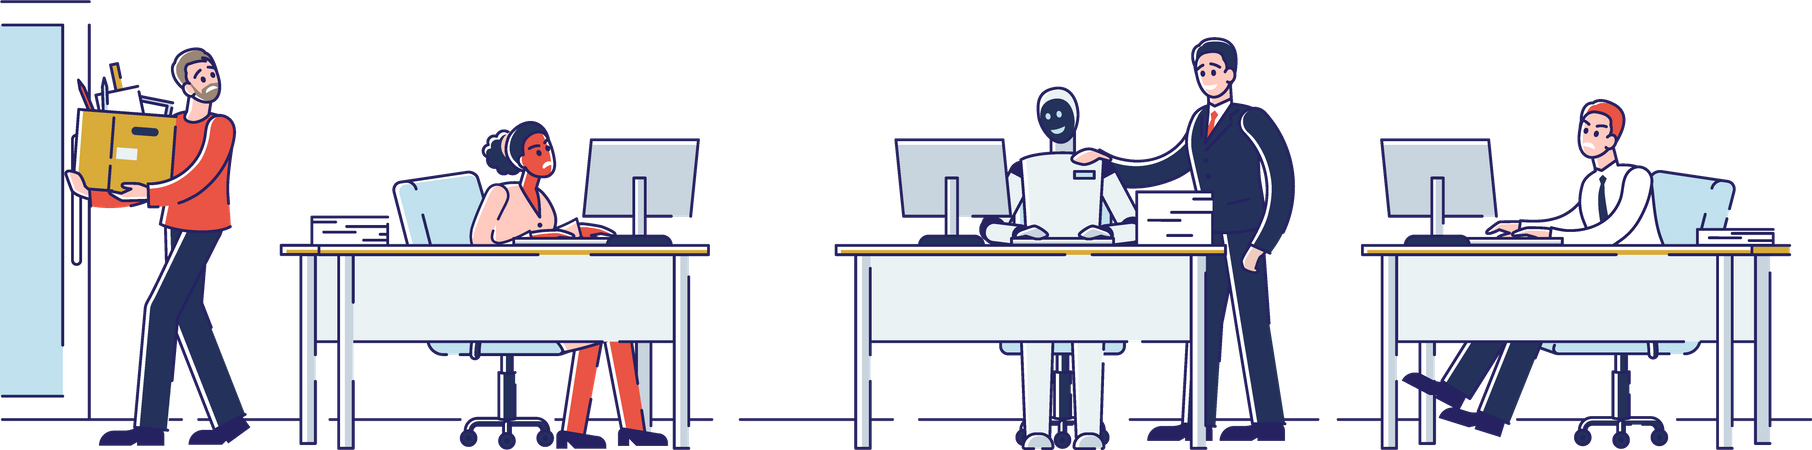 People Work With Robot In Office Illustration